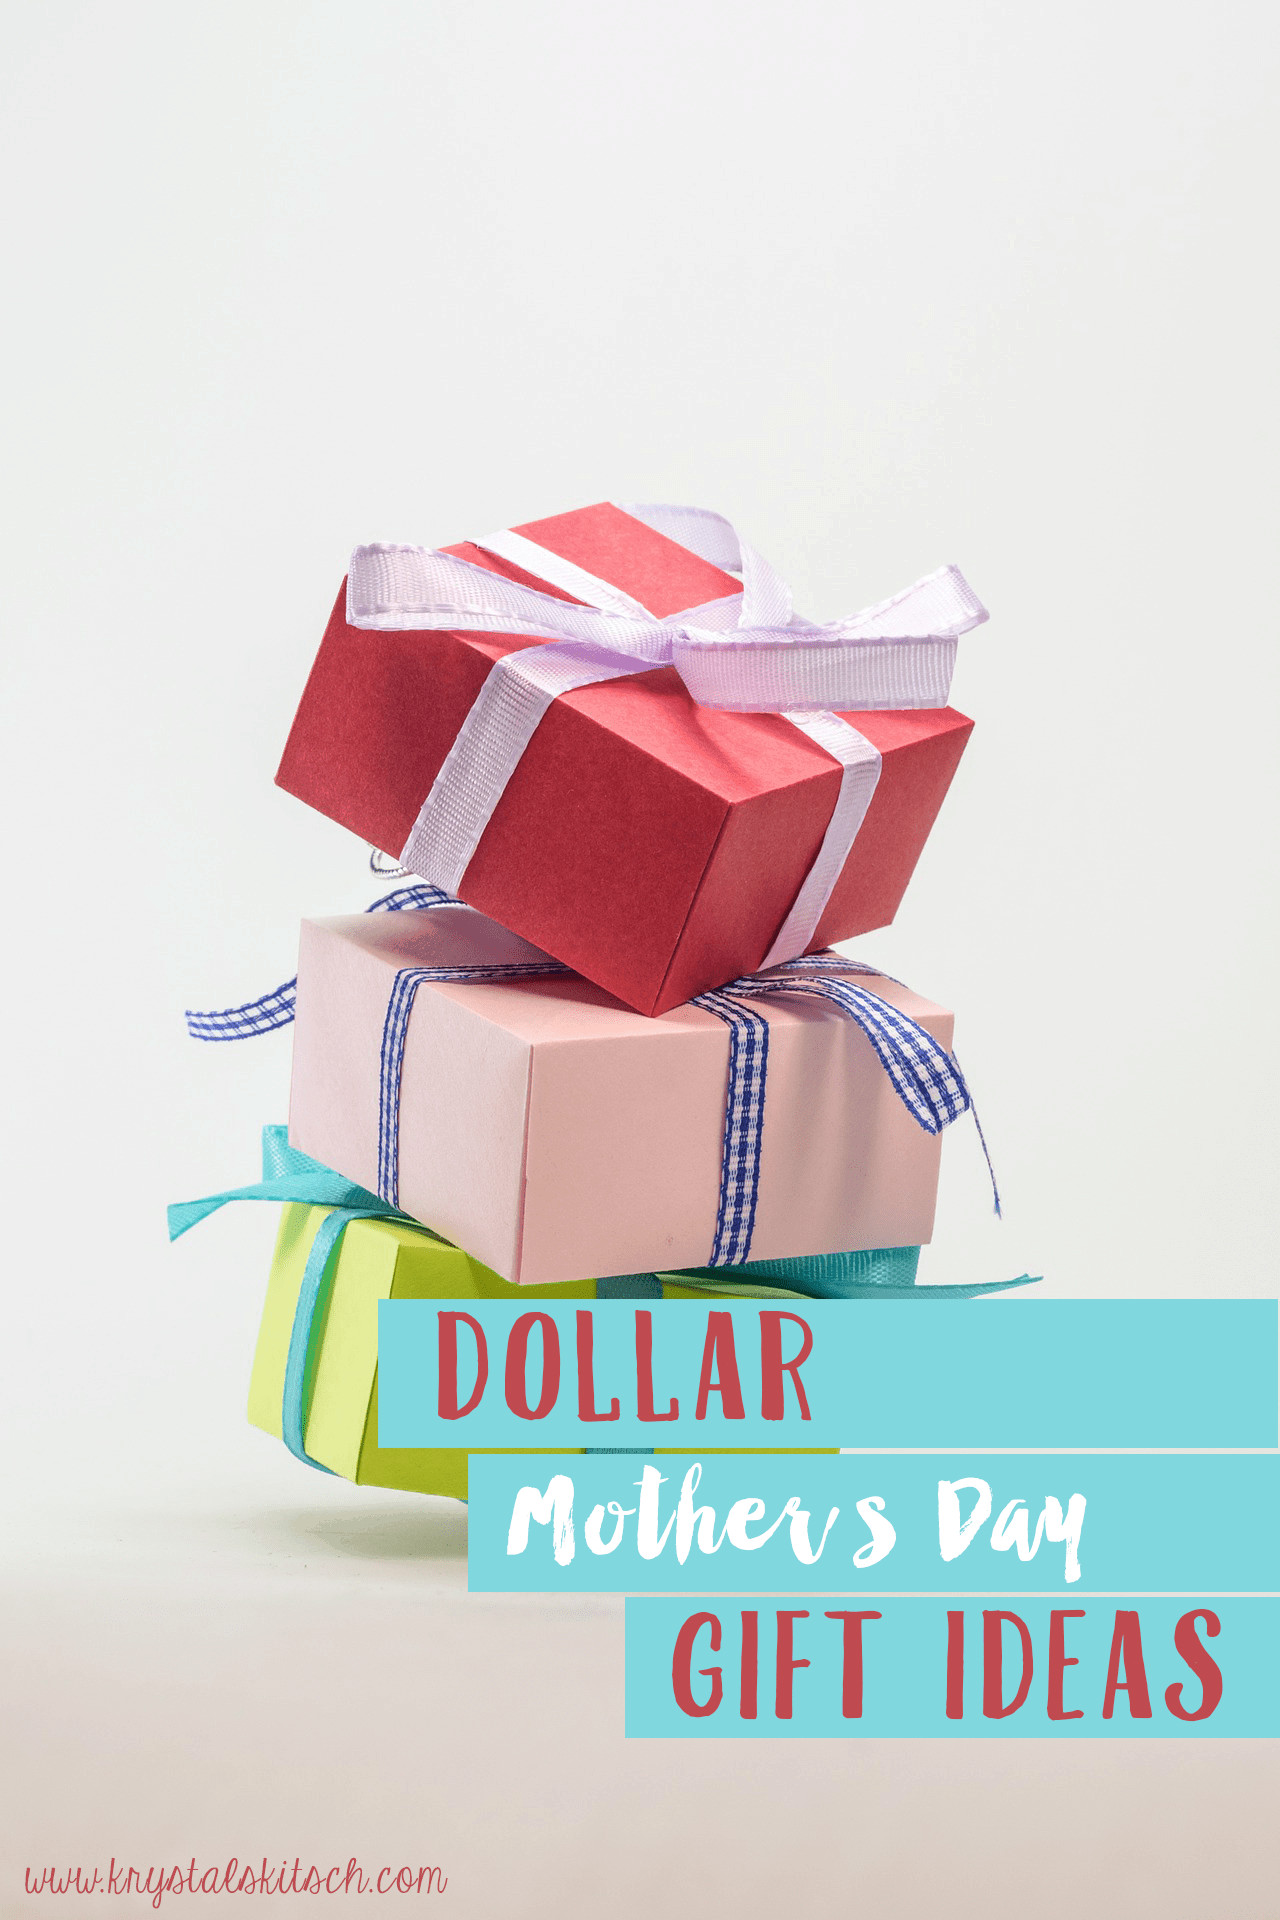 Mother'S Day Delivery Gift Ideas
 Mother s Day Gift Ideas For $1 Sunny Sweet Days